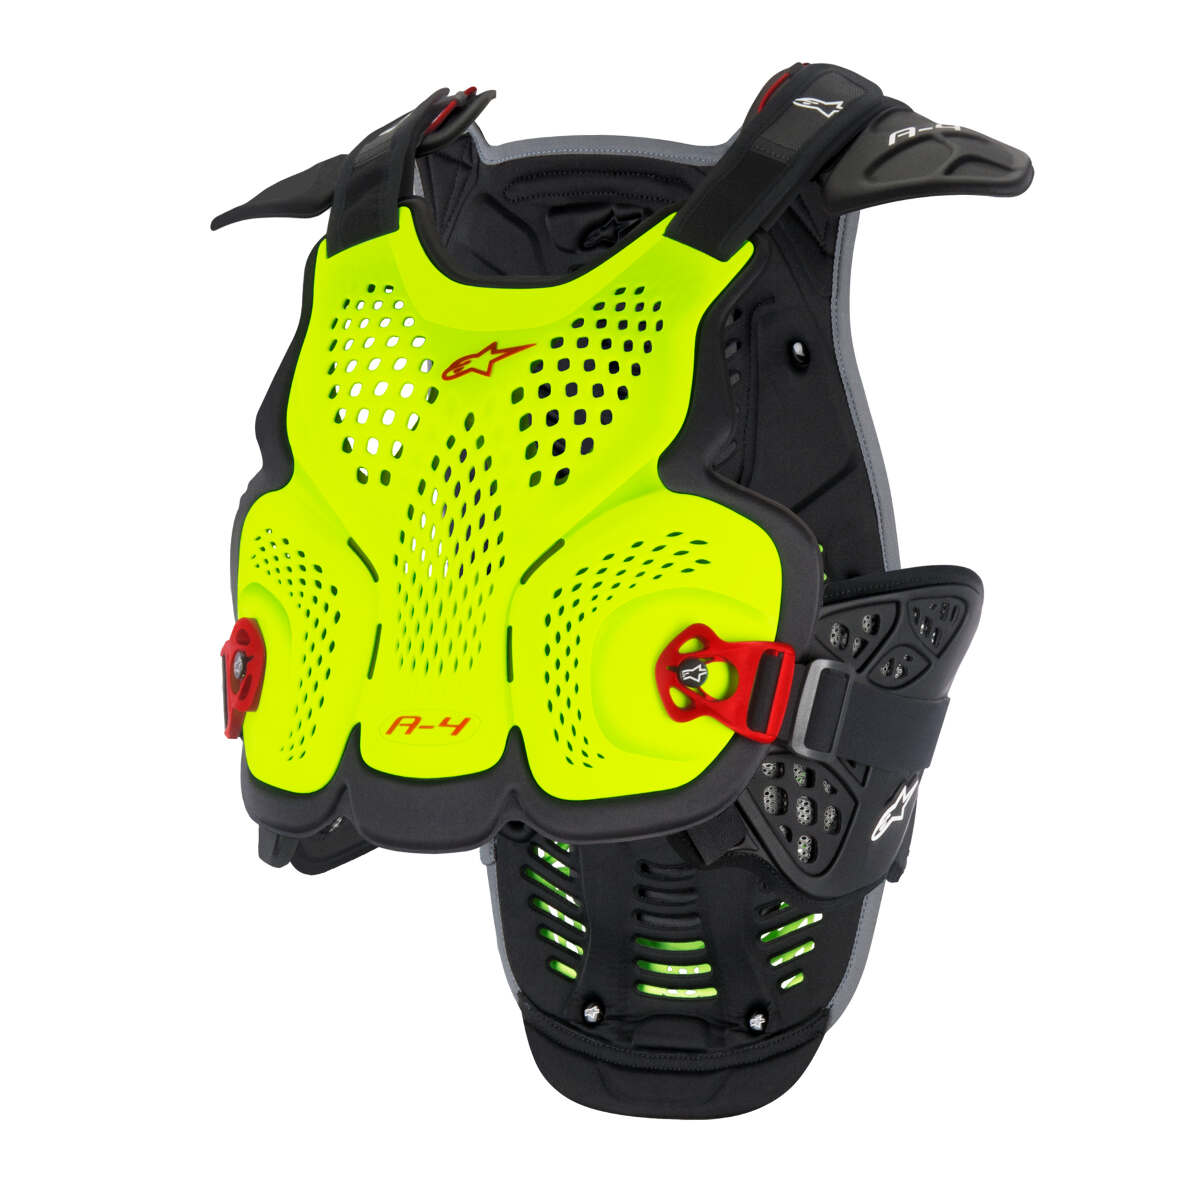 Alpinestars Pettorina A-4 Yellow Fluo/Red - Limited Edition Black Jack